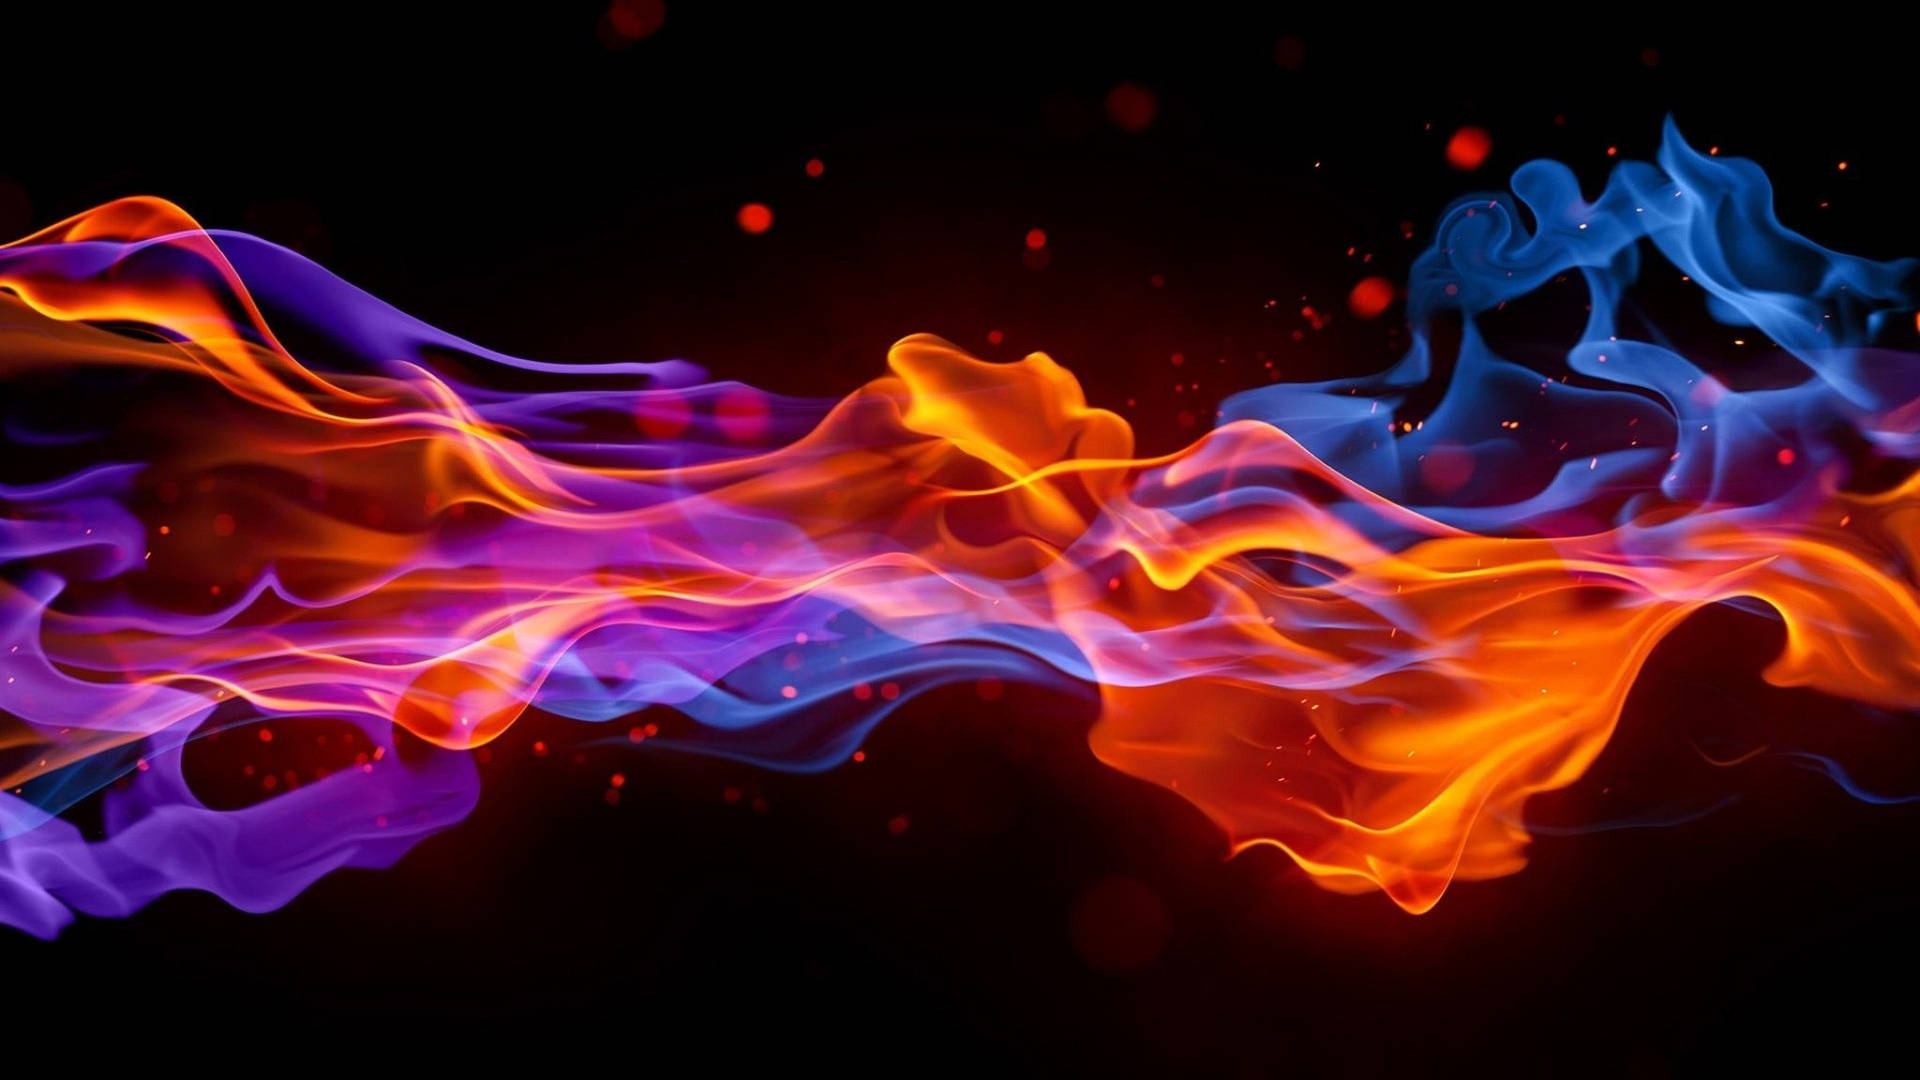 Blazing trace of fire with dark orange and yellow hues Wallpaper